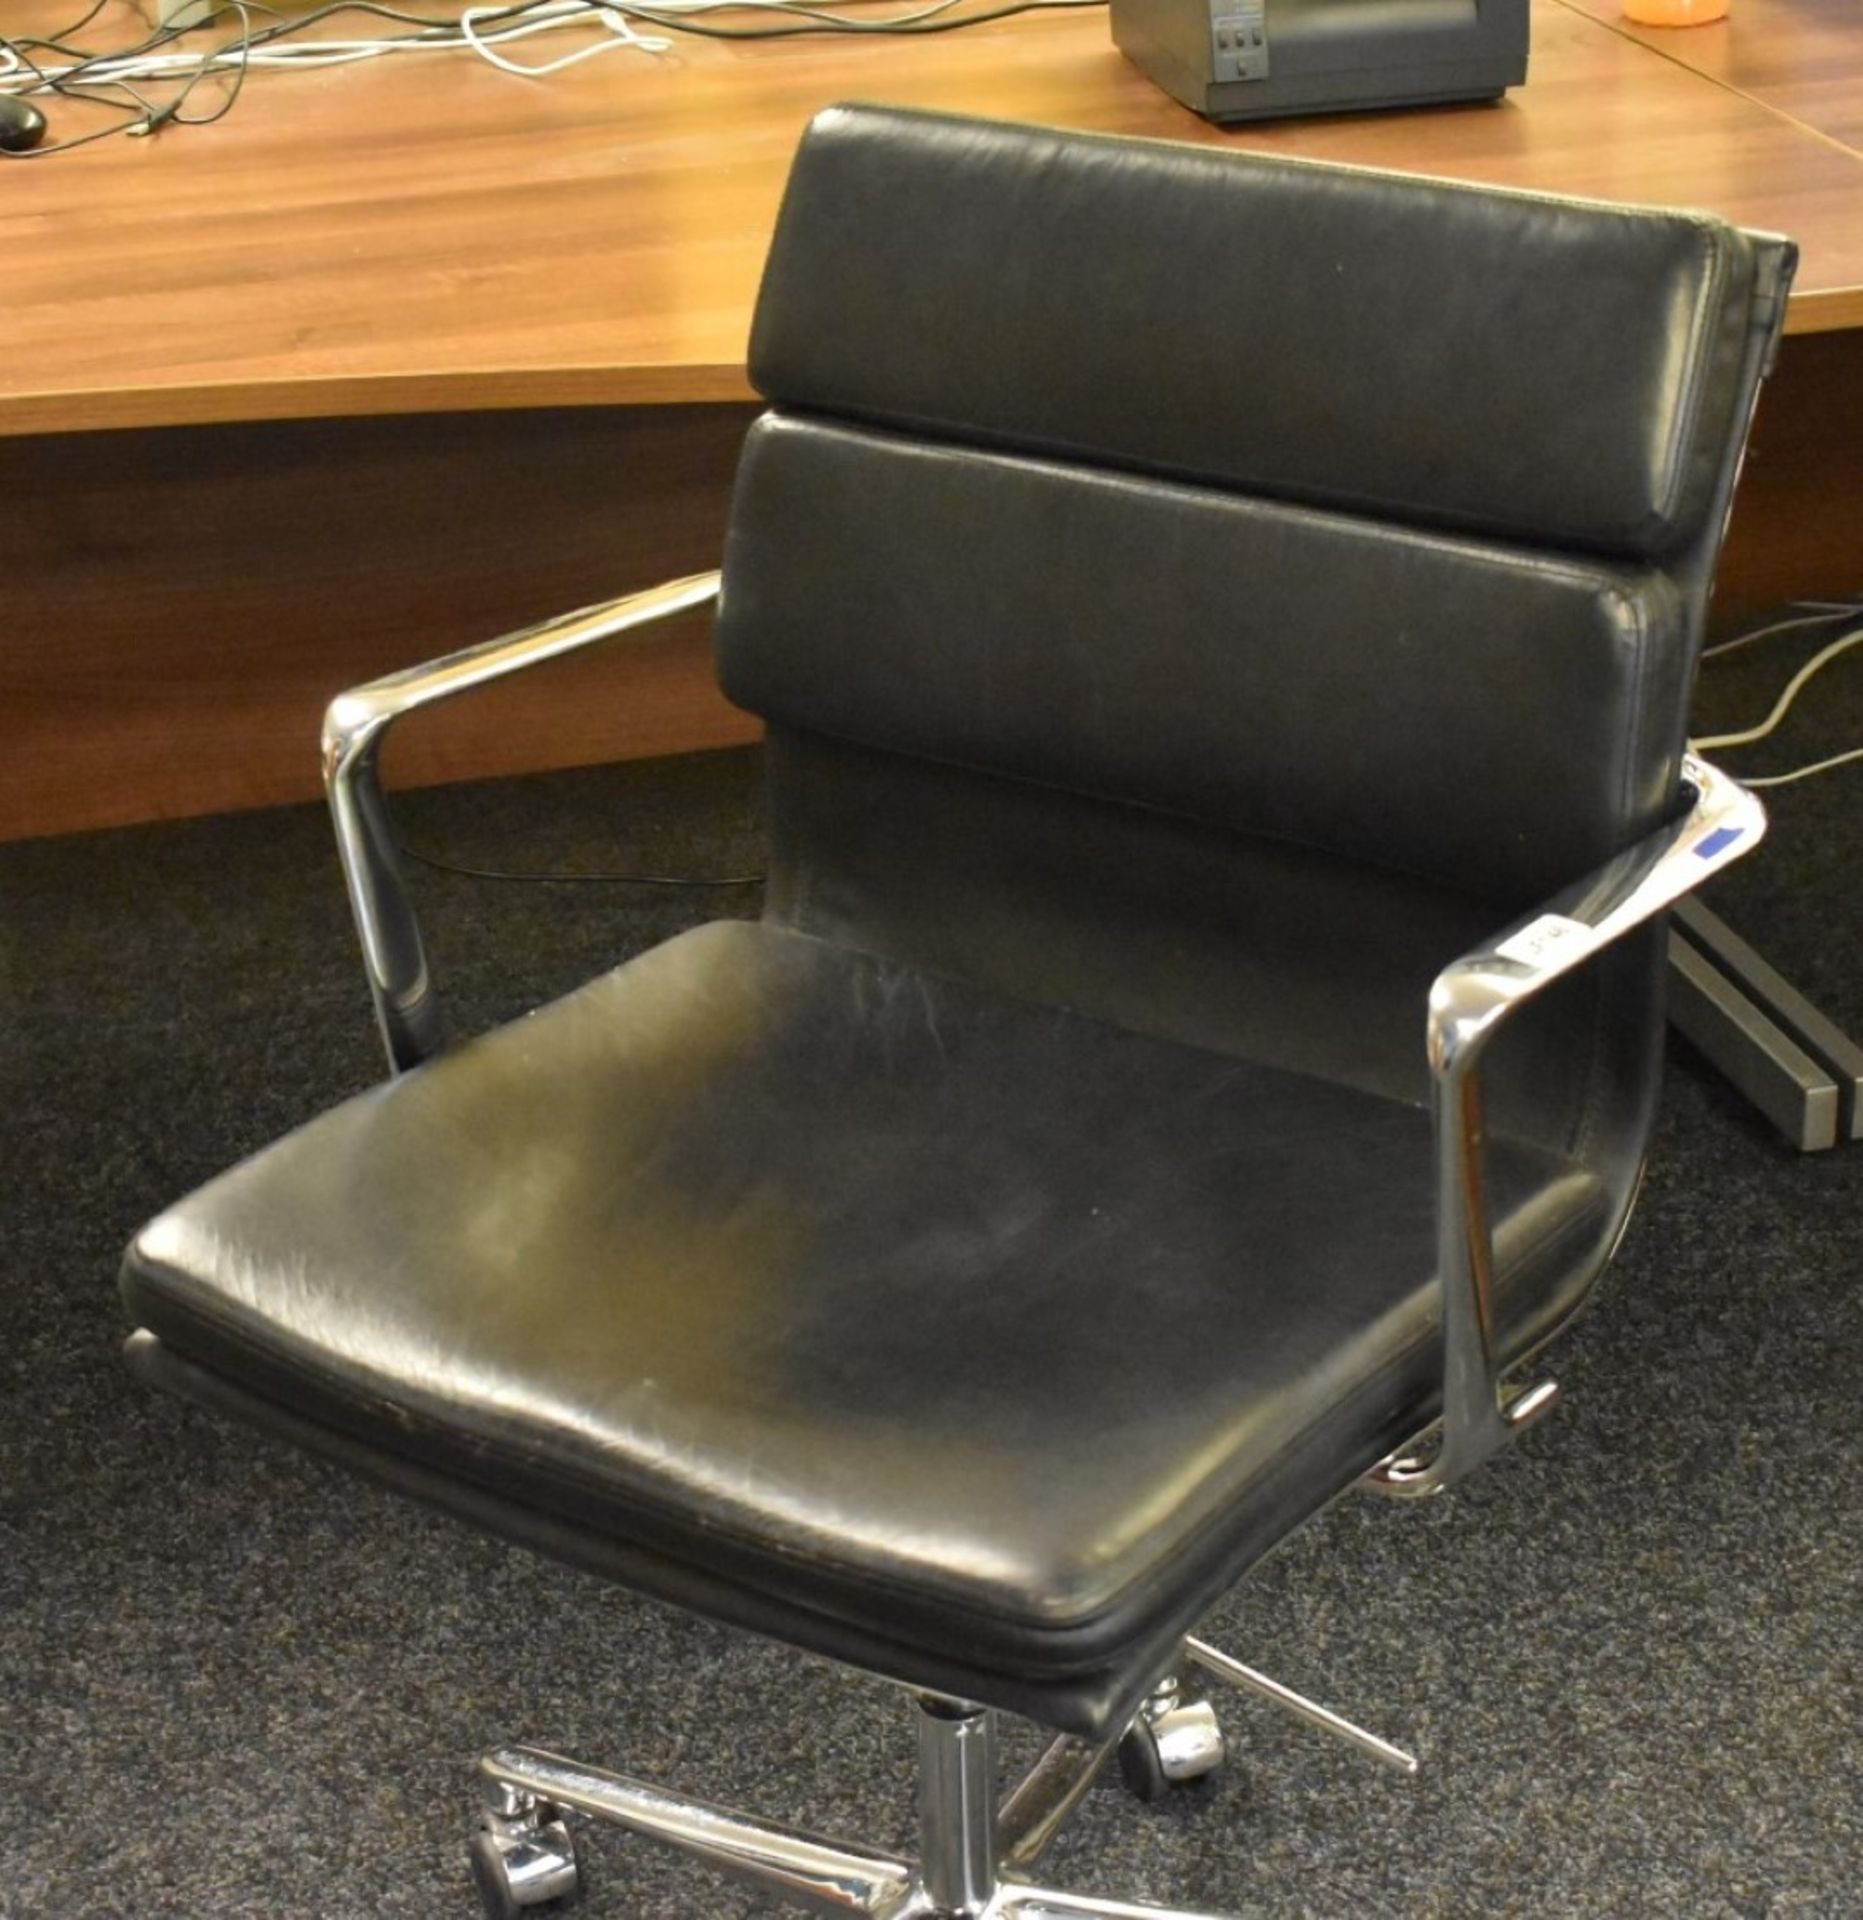 1 x Eames Inspired Office Chair - Swivel Office Chair Upholstered in Black Leather - Image 3 of 7